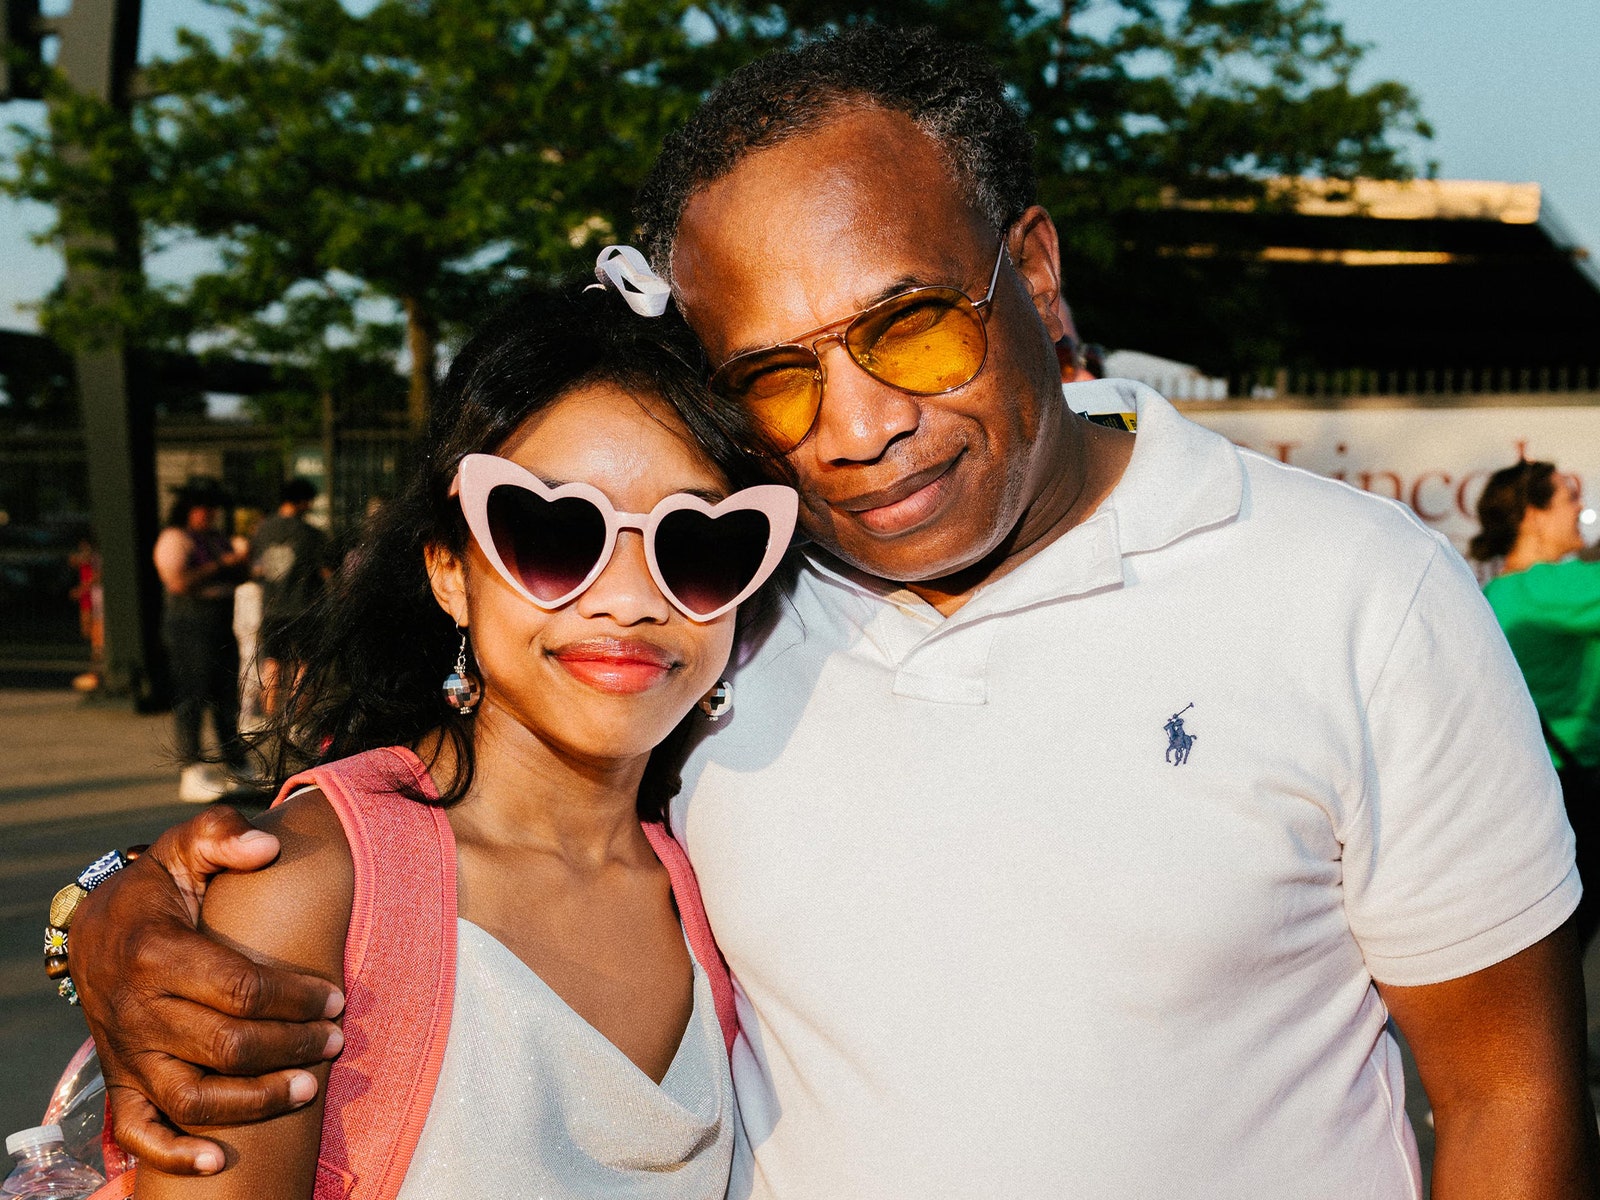 Talking With ‘Swiftie Dads’ at a Taylor Swift Concert